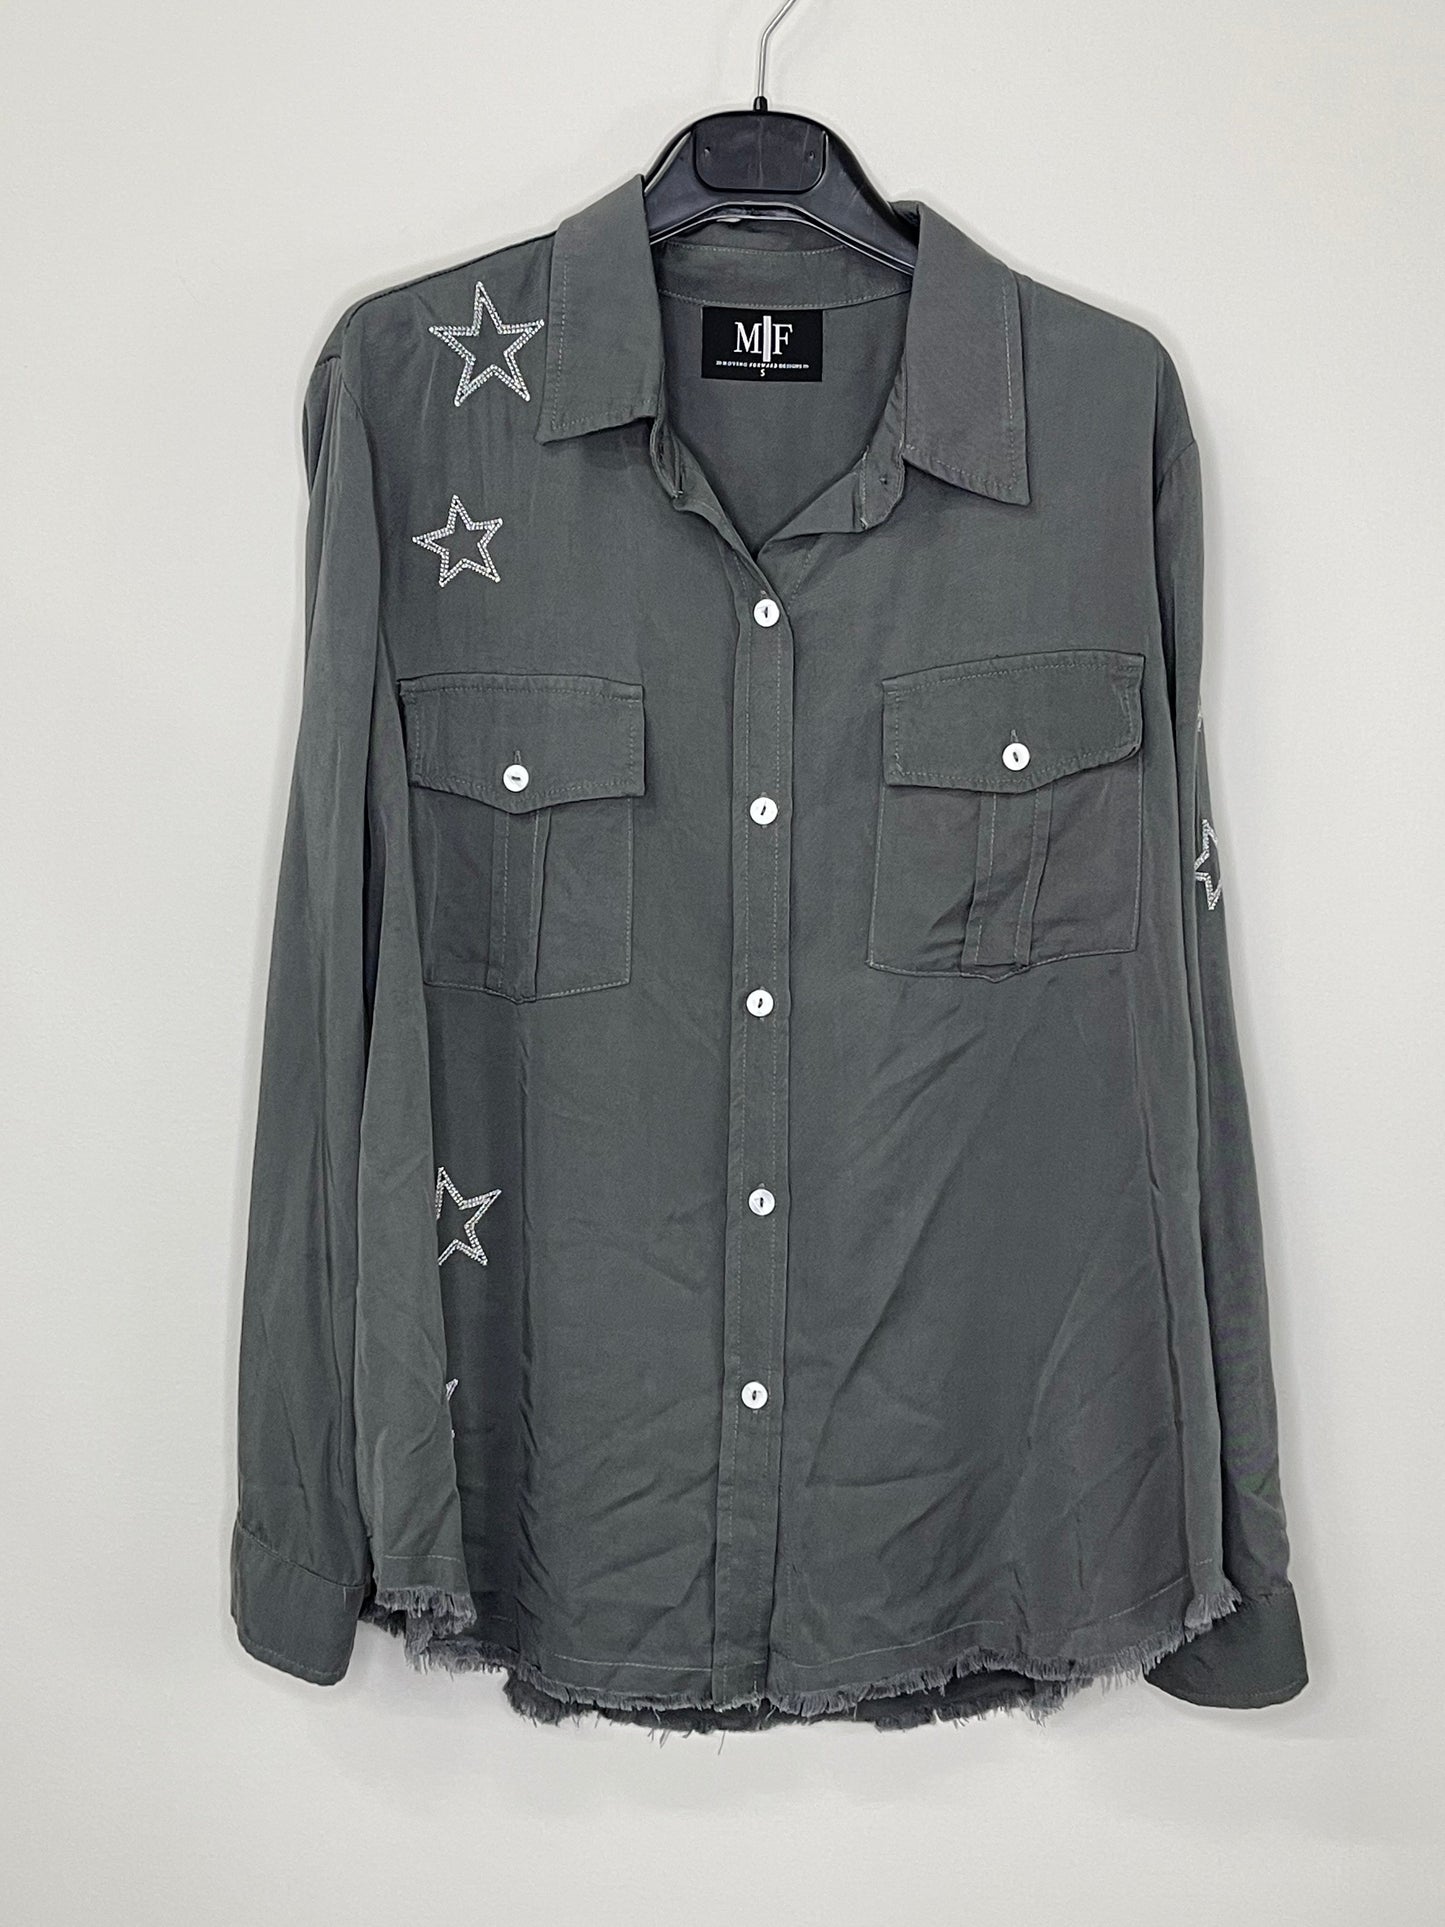 Shirt, Embroidered Star Gray, Love Repeater